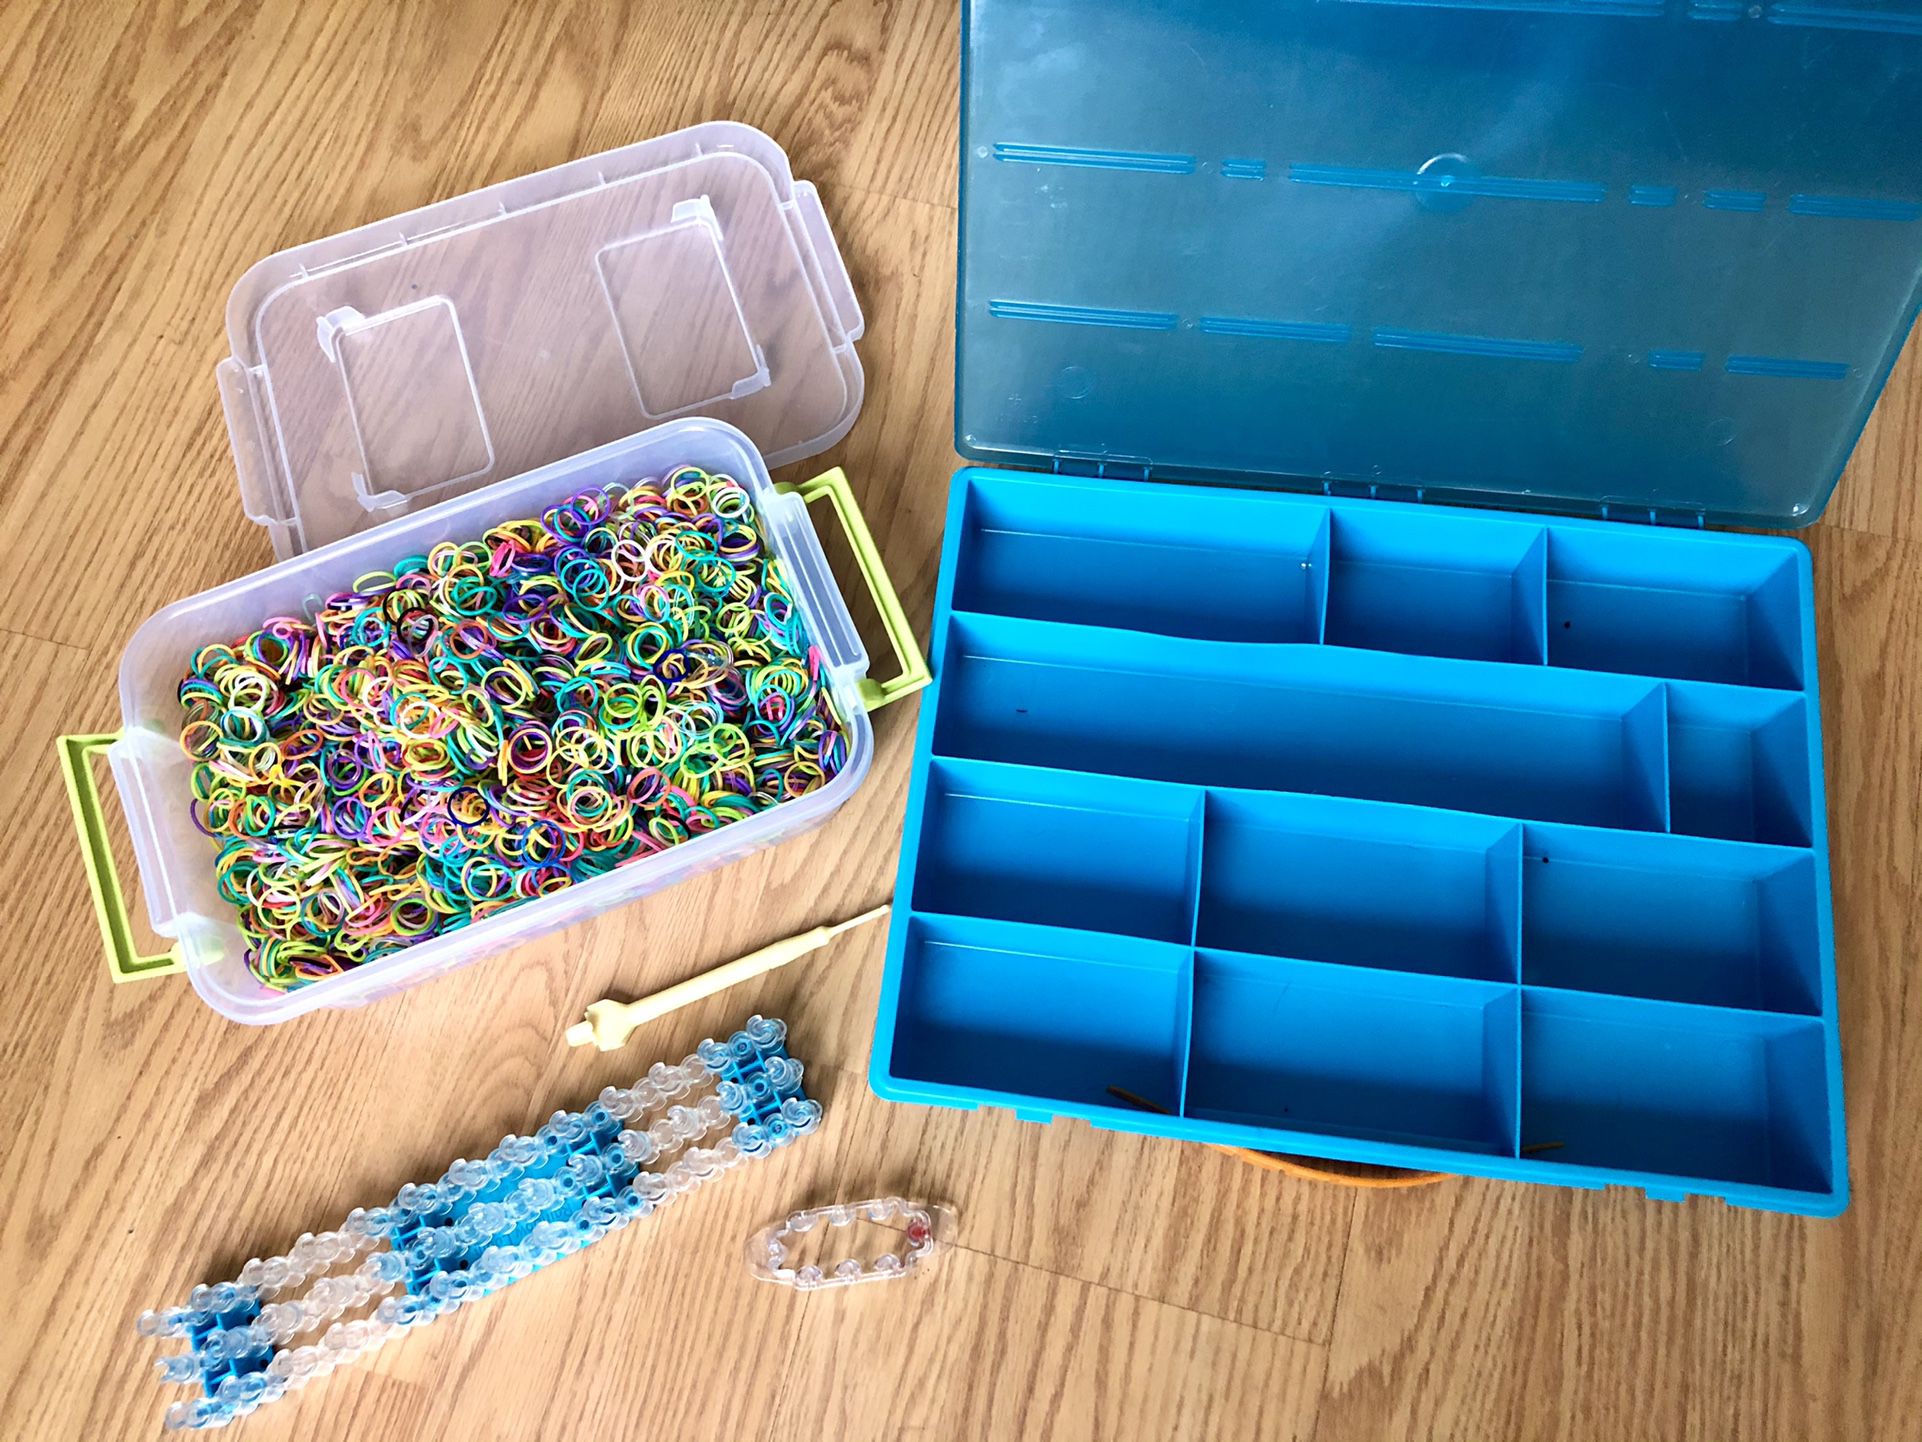 Rainbow loom And carrying case